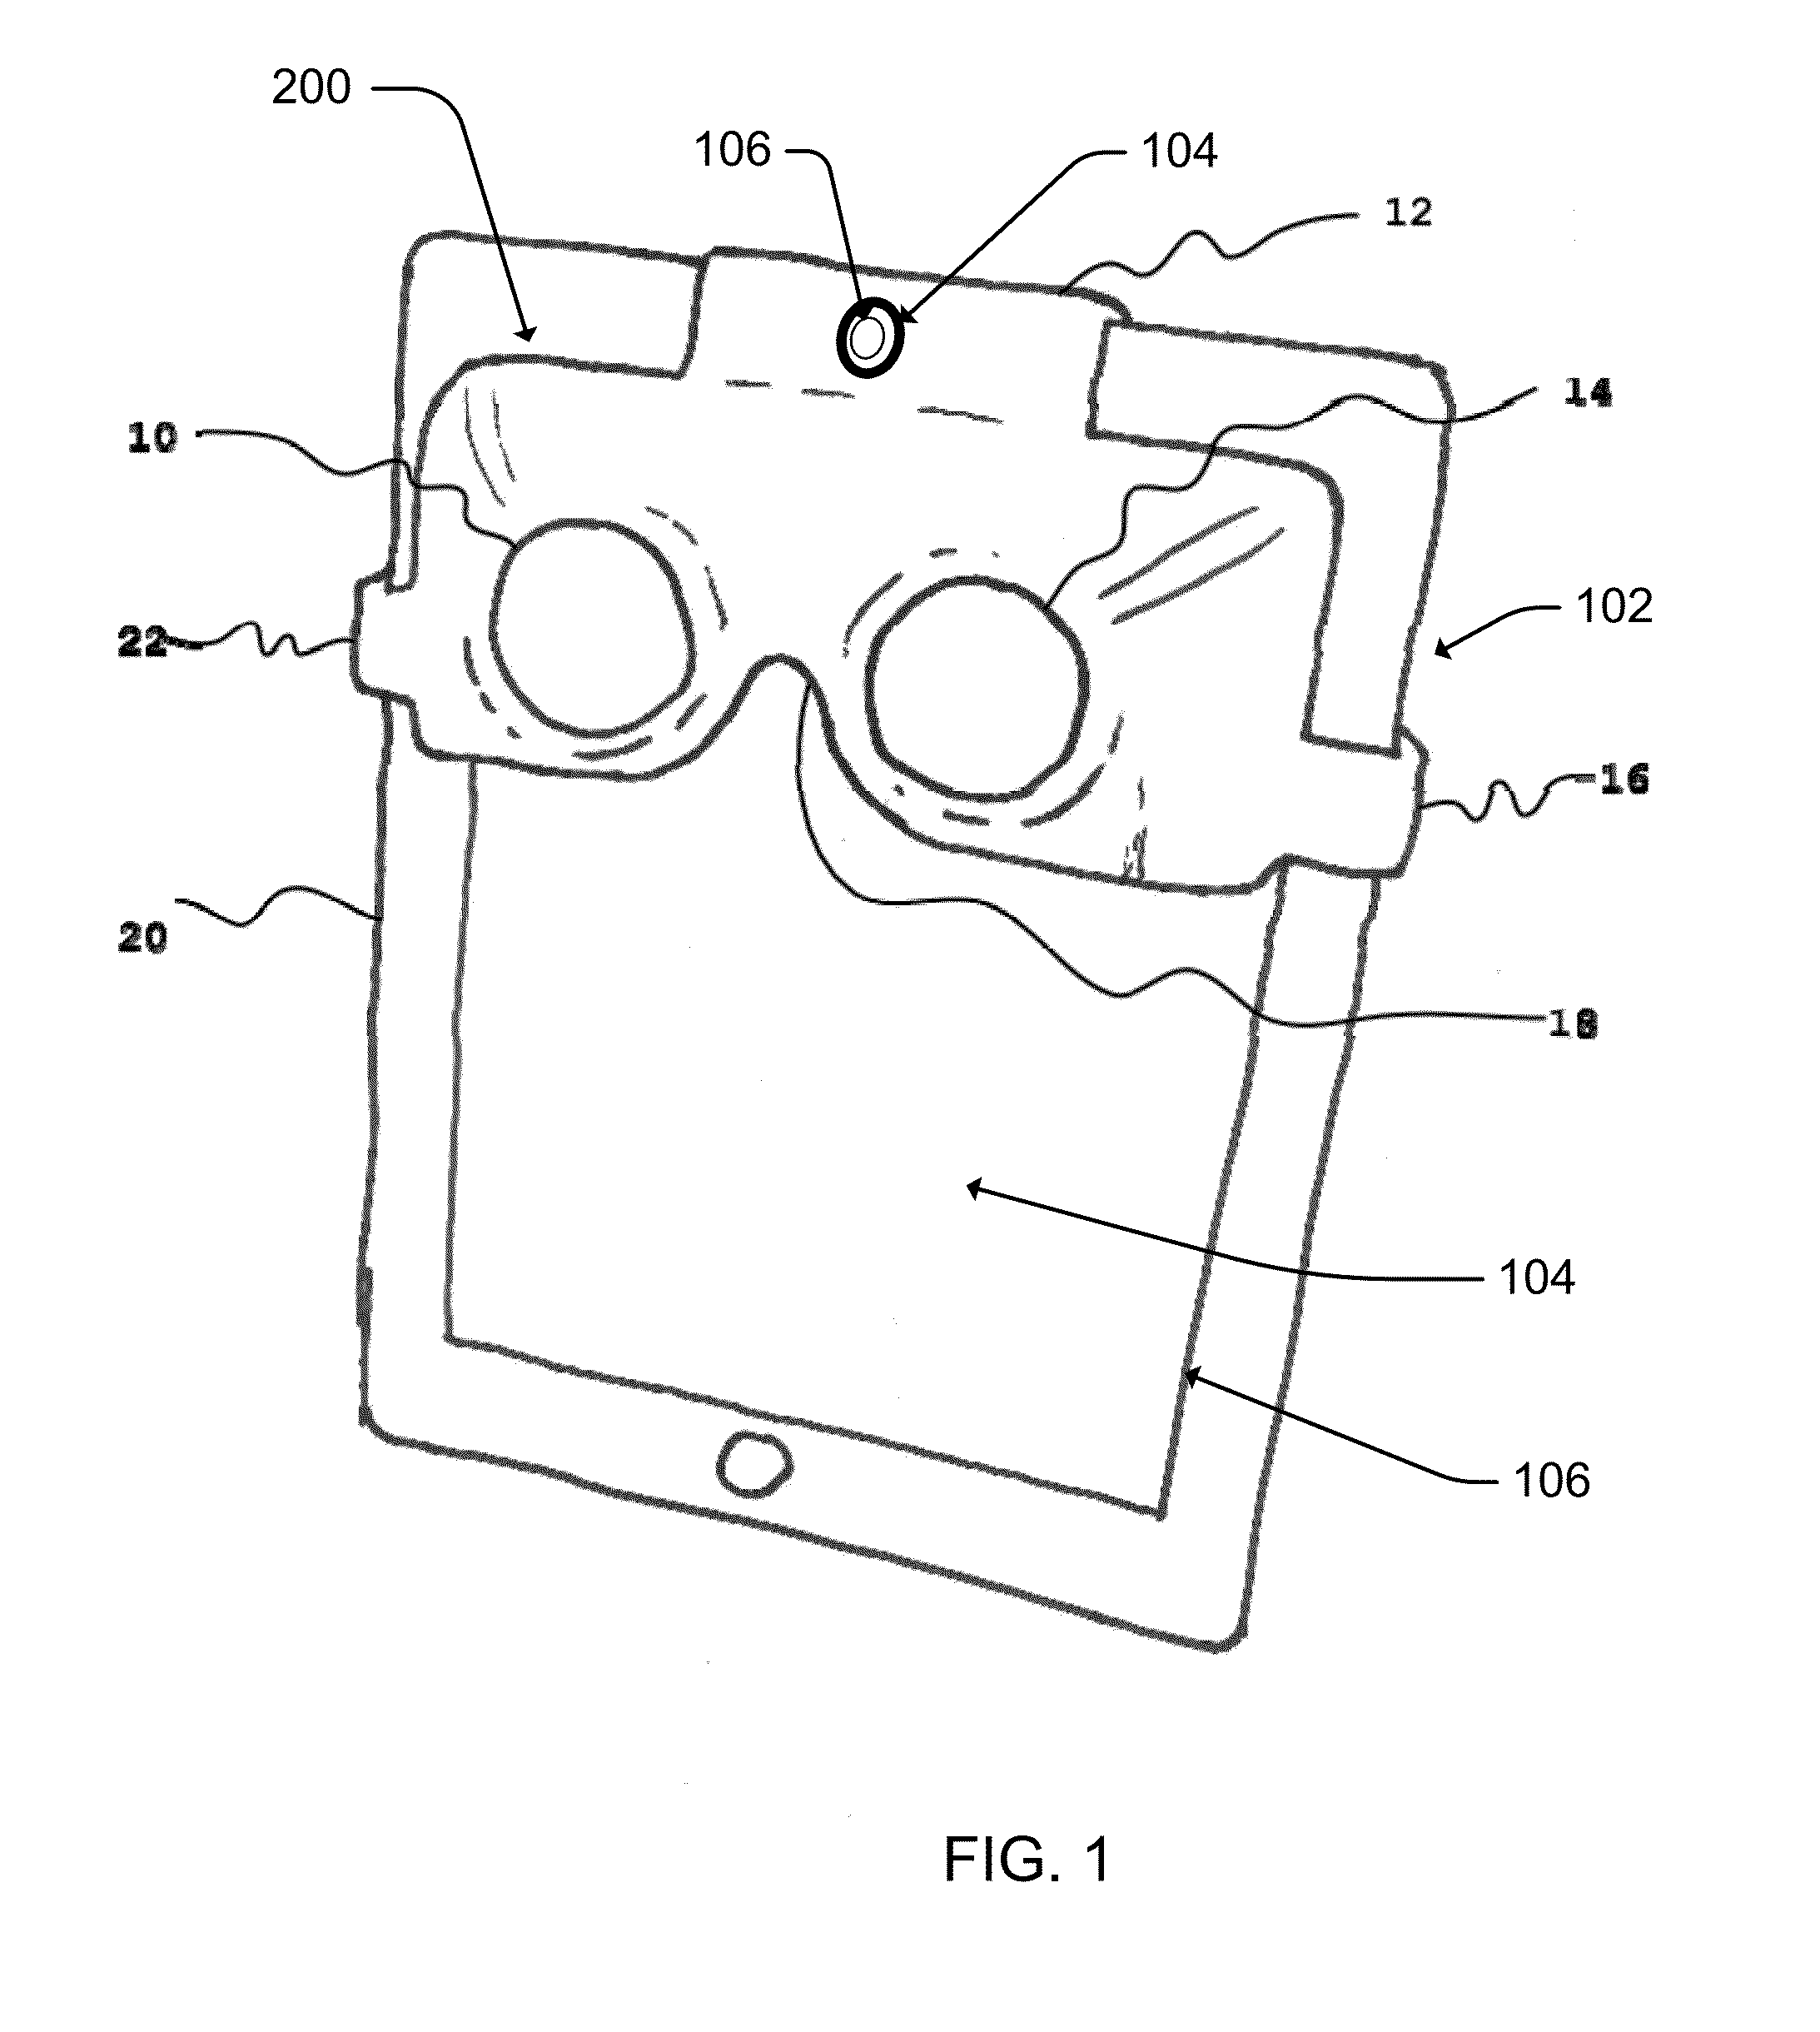 Hybrid stereoscopic viewing device